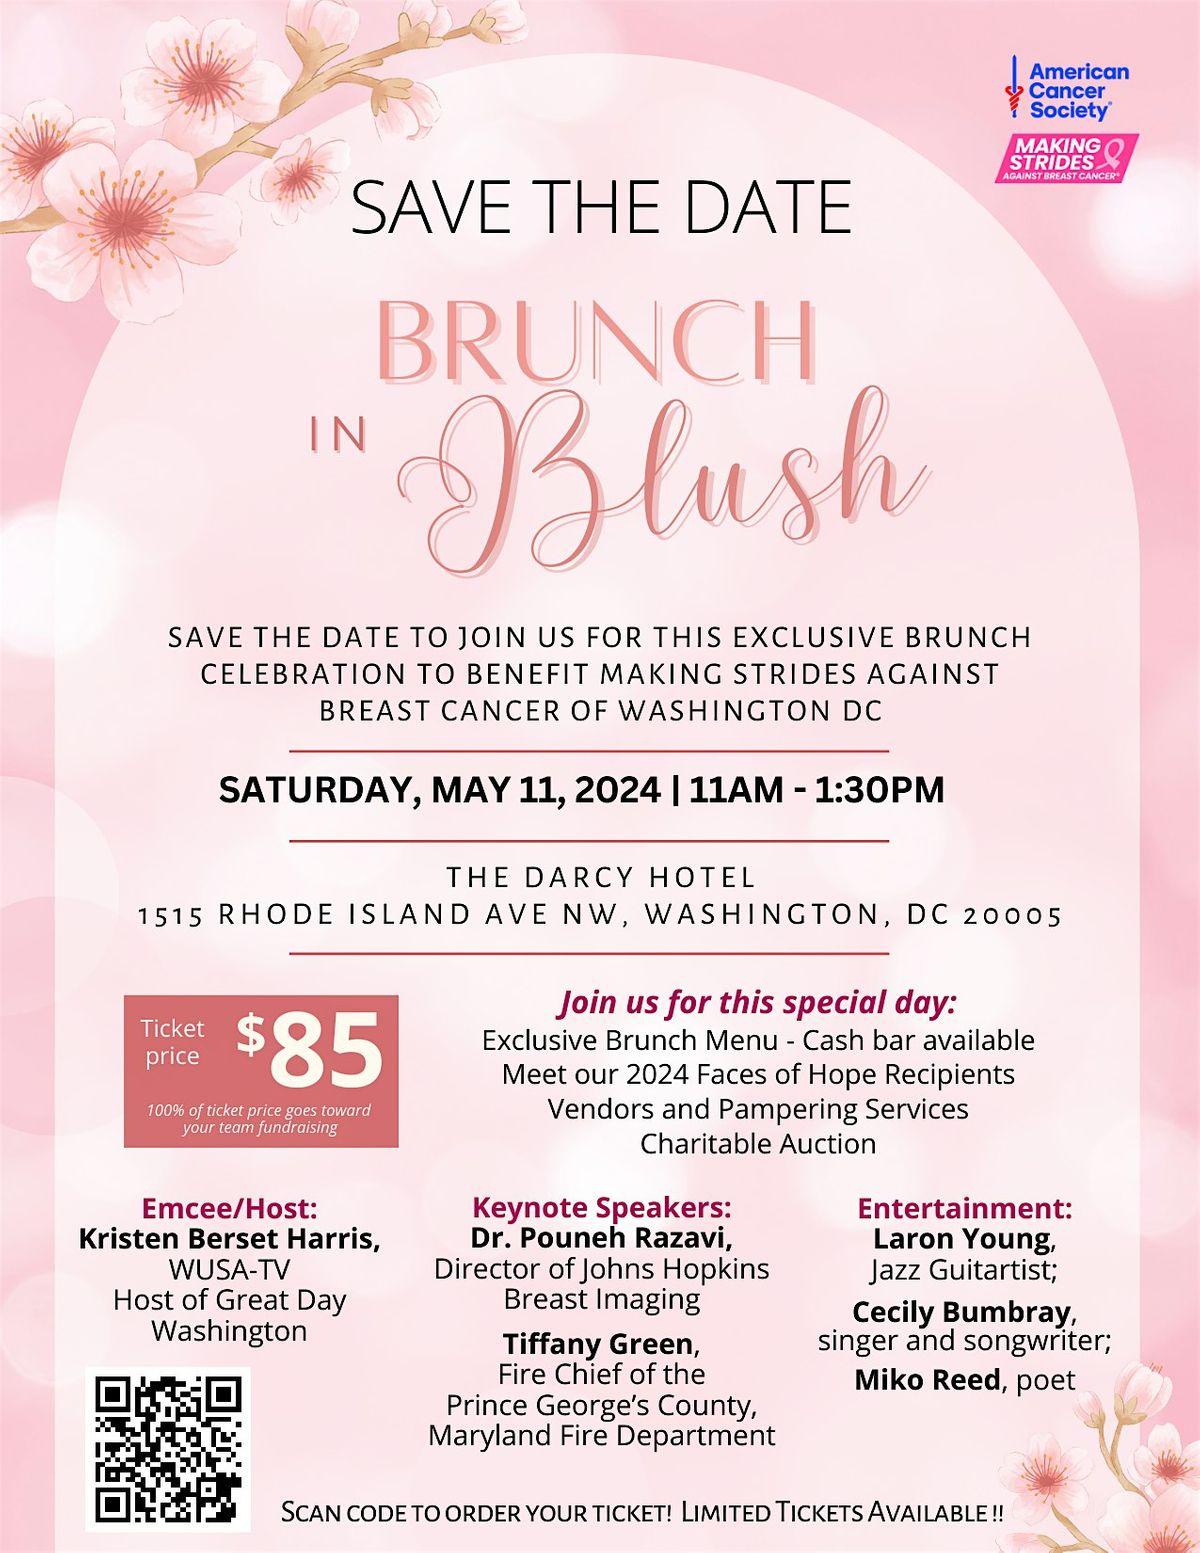 Brunch in Blush at the Darcy Hotel in DC on Saturday, March 11th